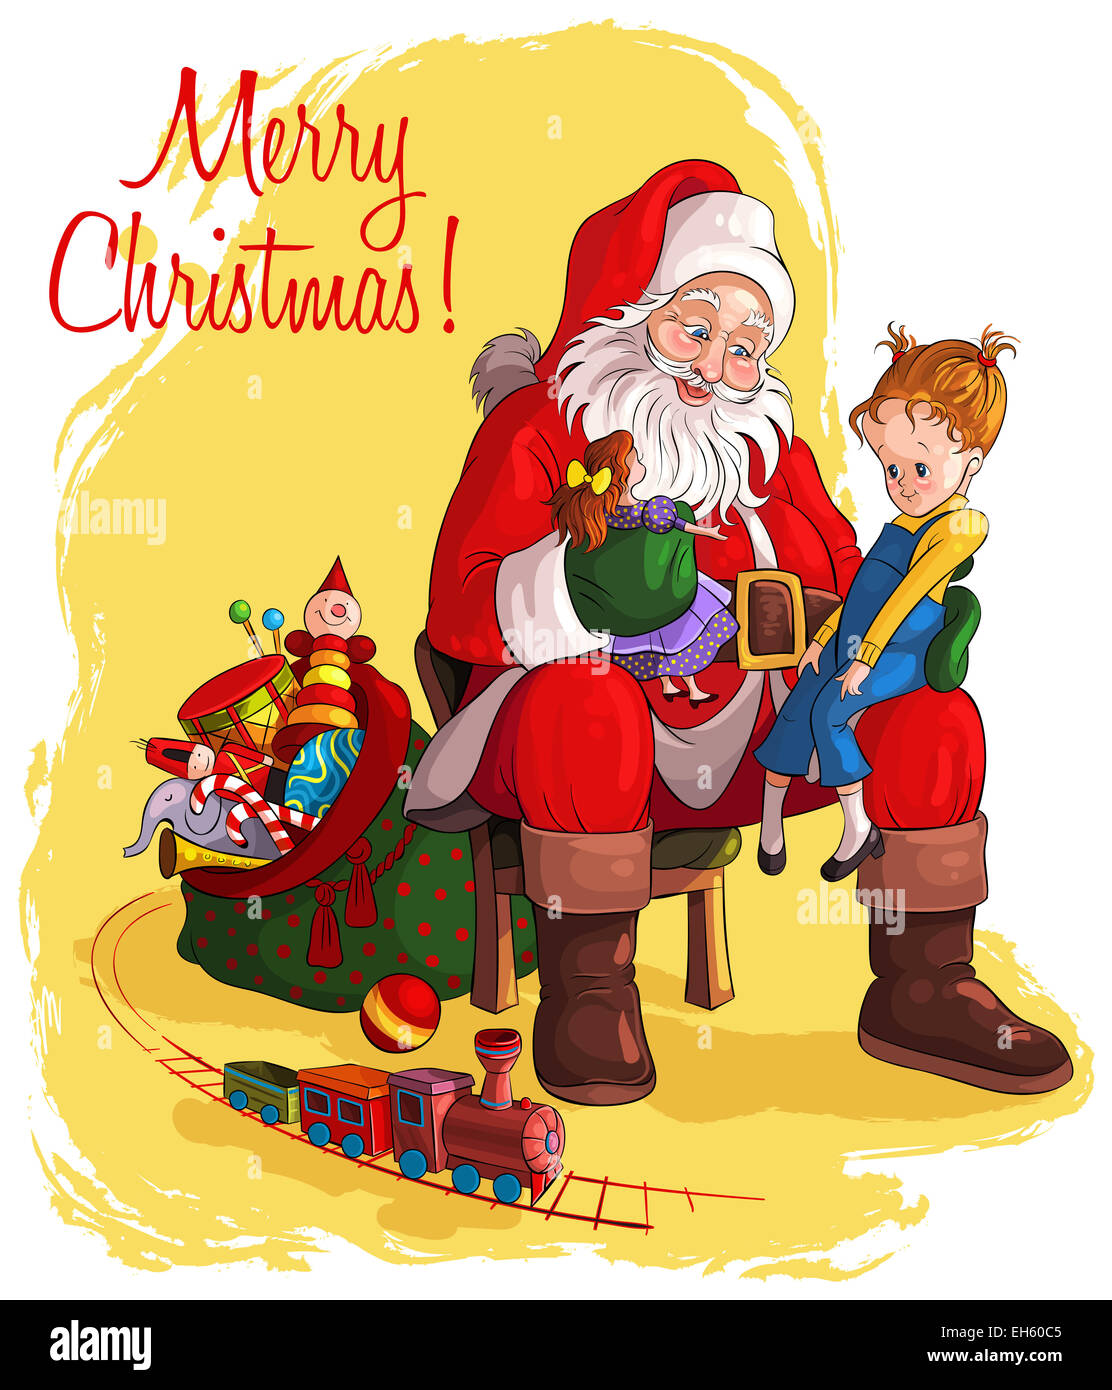 Santa Claus sitting in chair with sack of gift give Christmas gifts to children Stock Photo